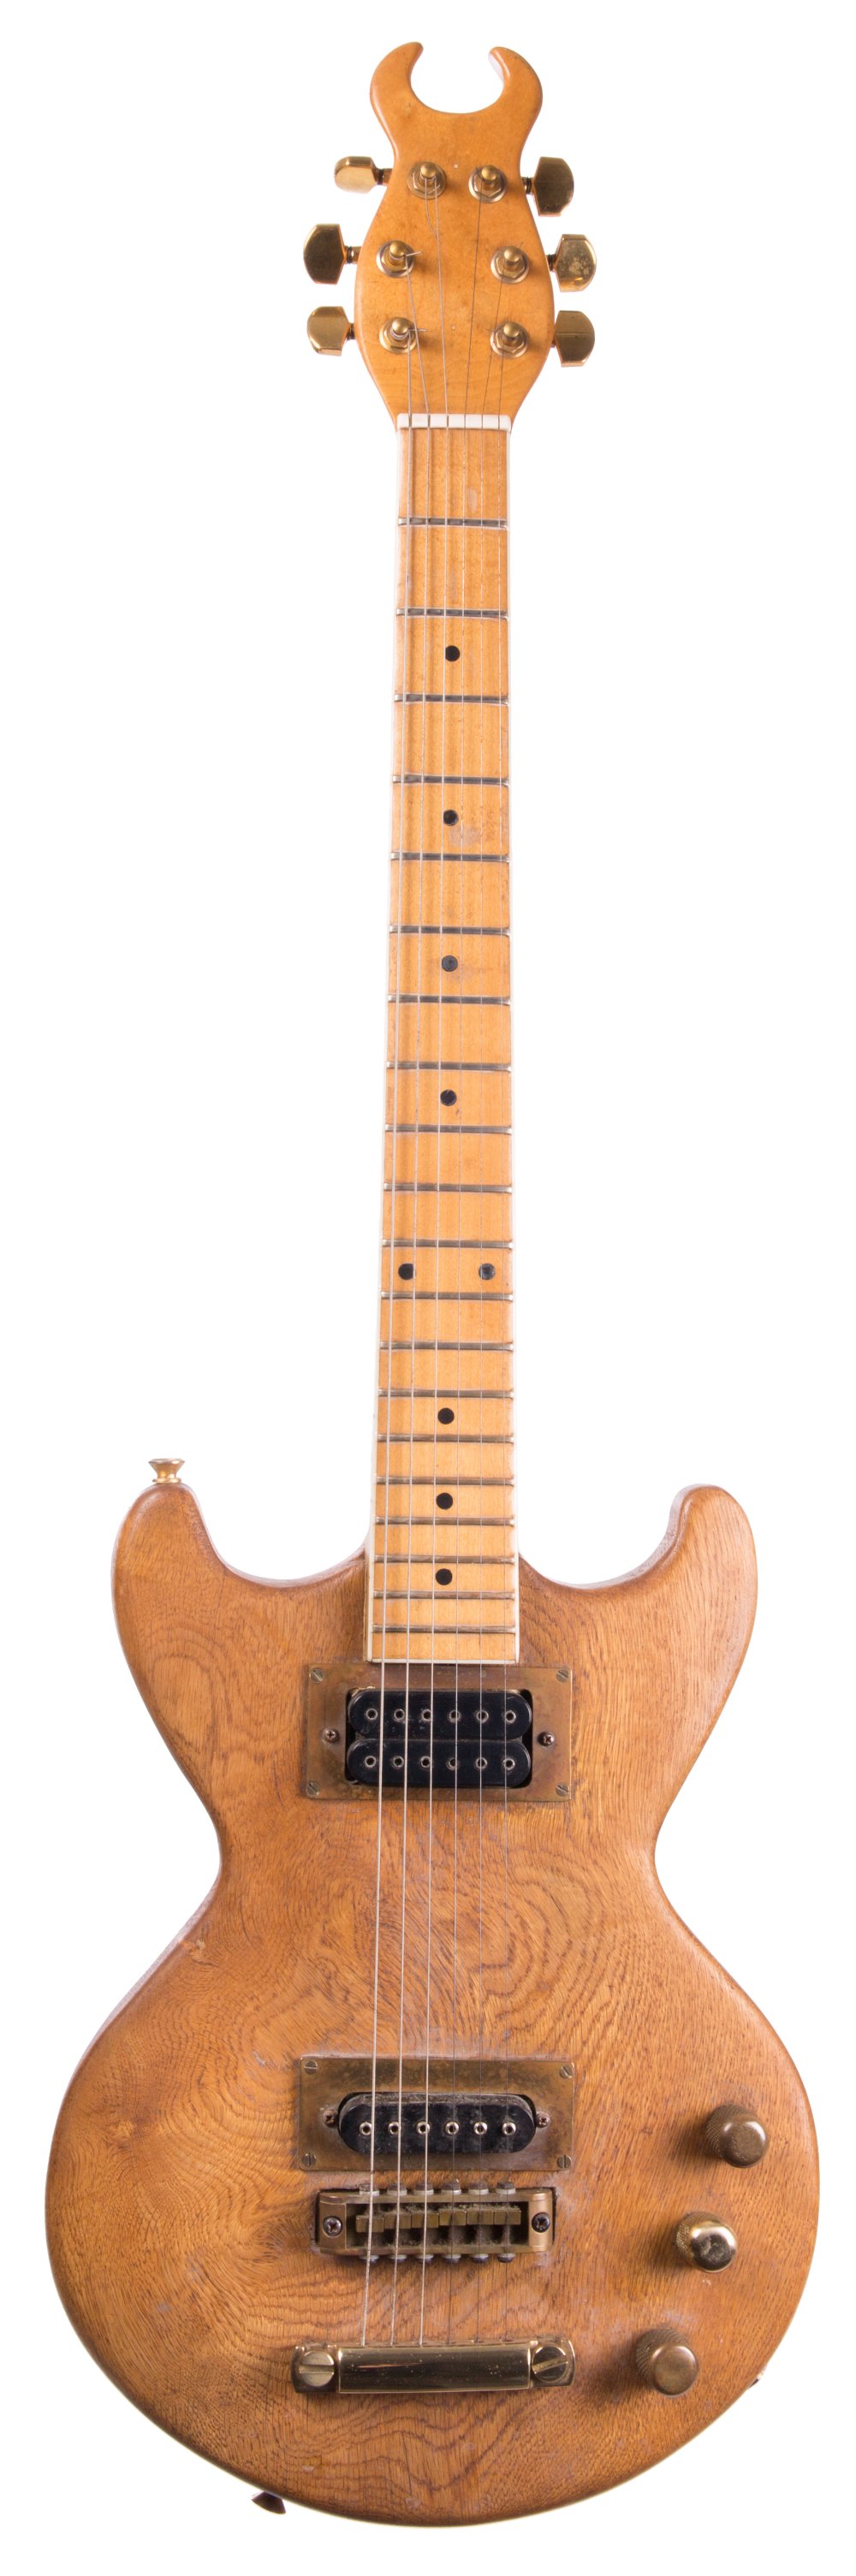 Interesting proto-type electric guitar with Burns Steer neck and custom double cut body; Finish: